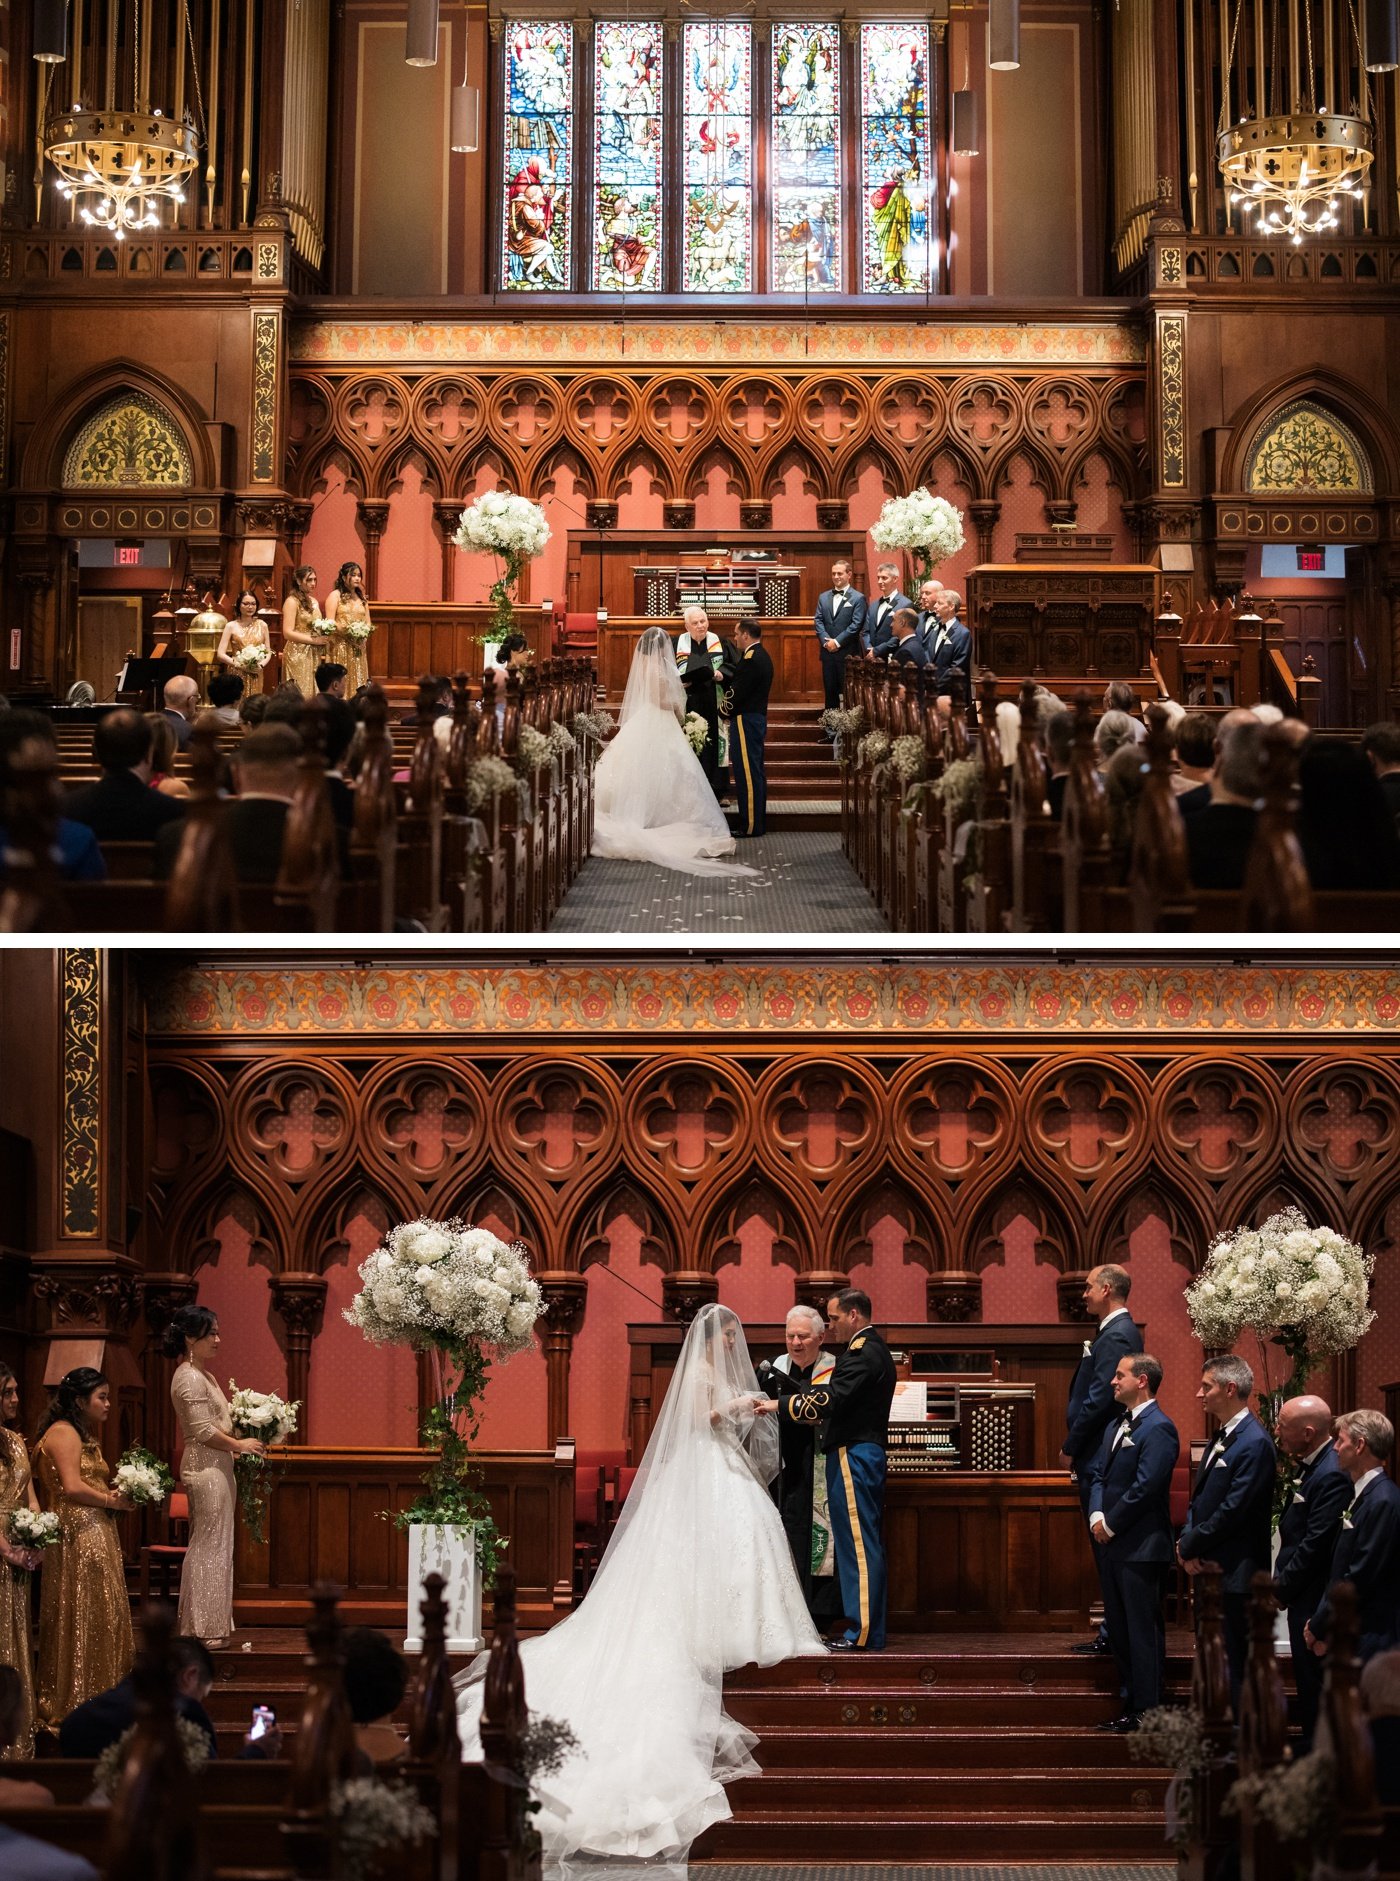 Wedding ceremony at Old South Church in Boston, MA